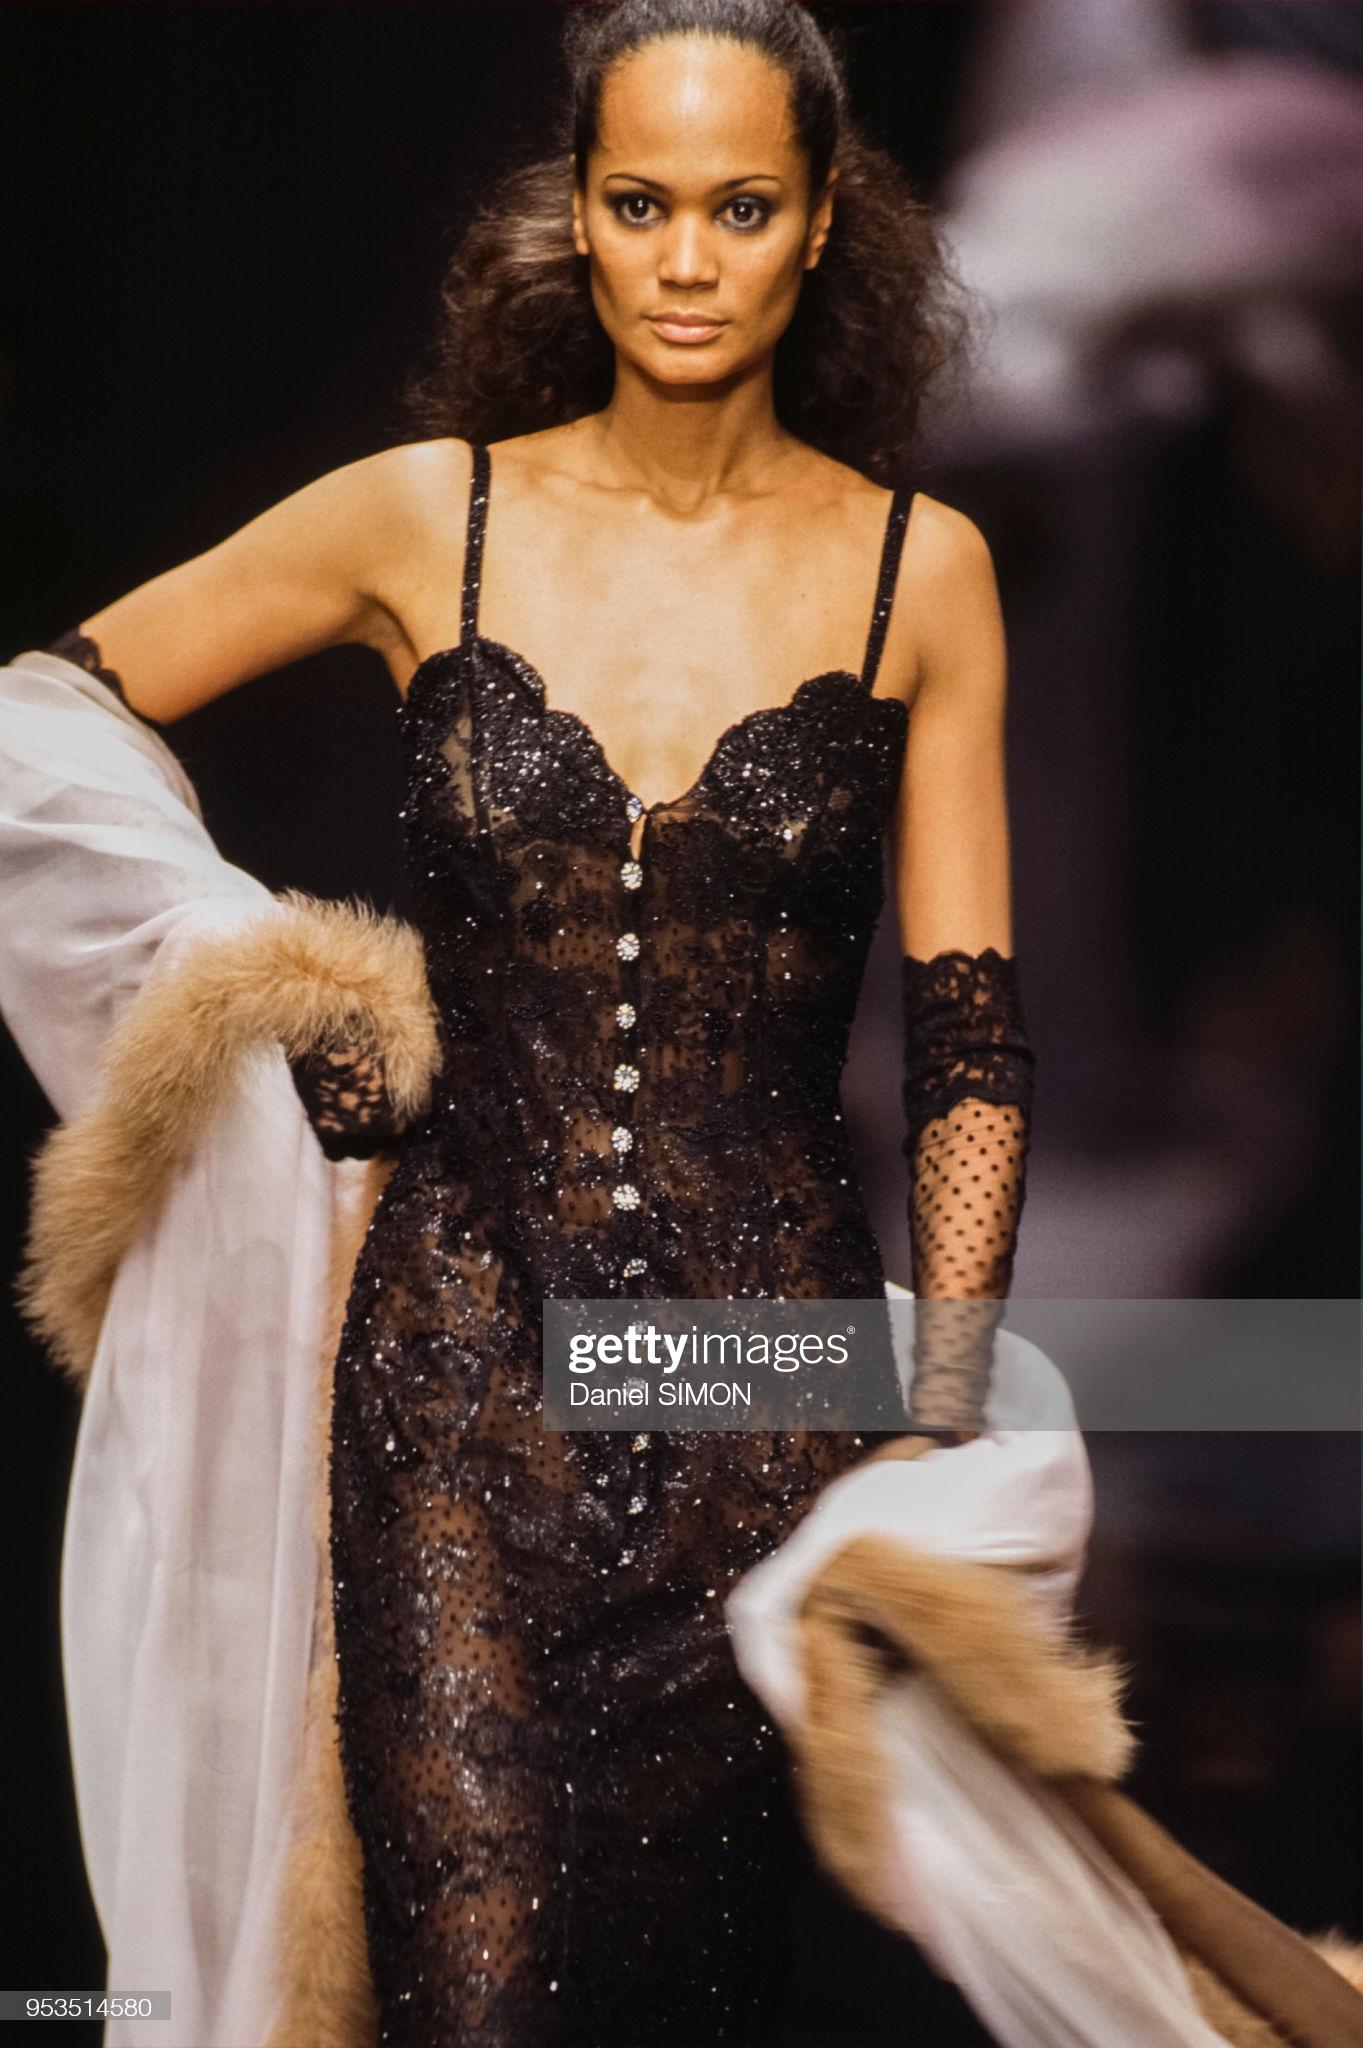 Stunning Ungaro haute couture red lace gown ensemble dating back to his 1995-96 fall/winter runway collection. Ungaro, who trained under Spanish designer Cristobal Balenciaga, described himself as a 